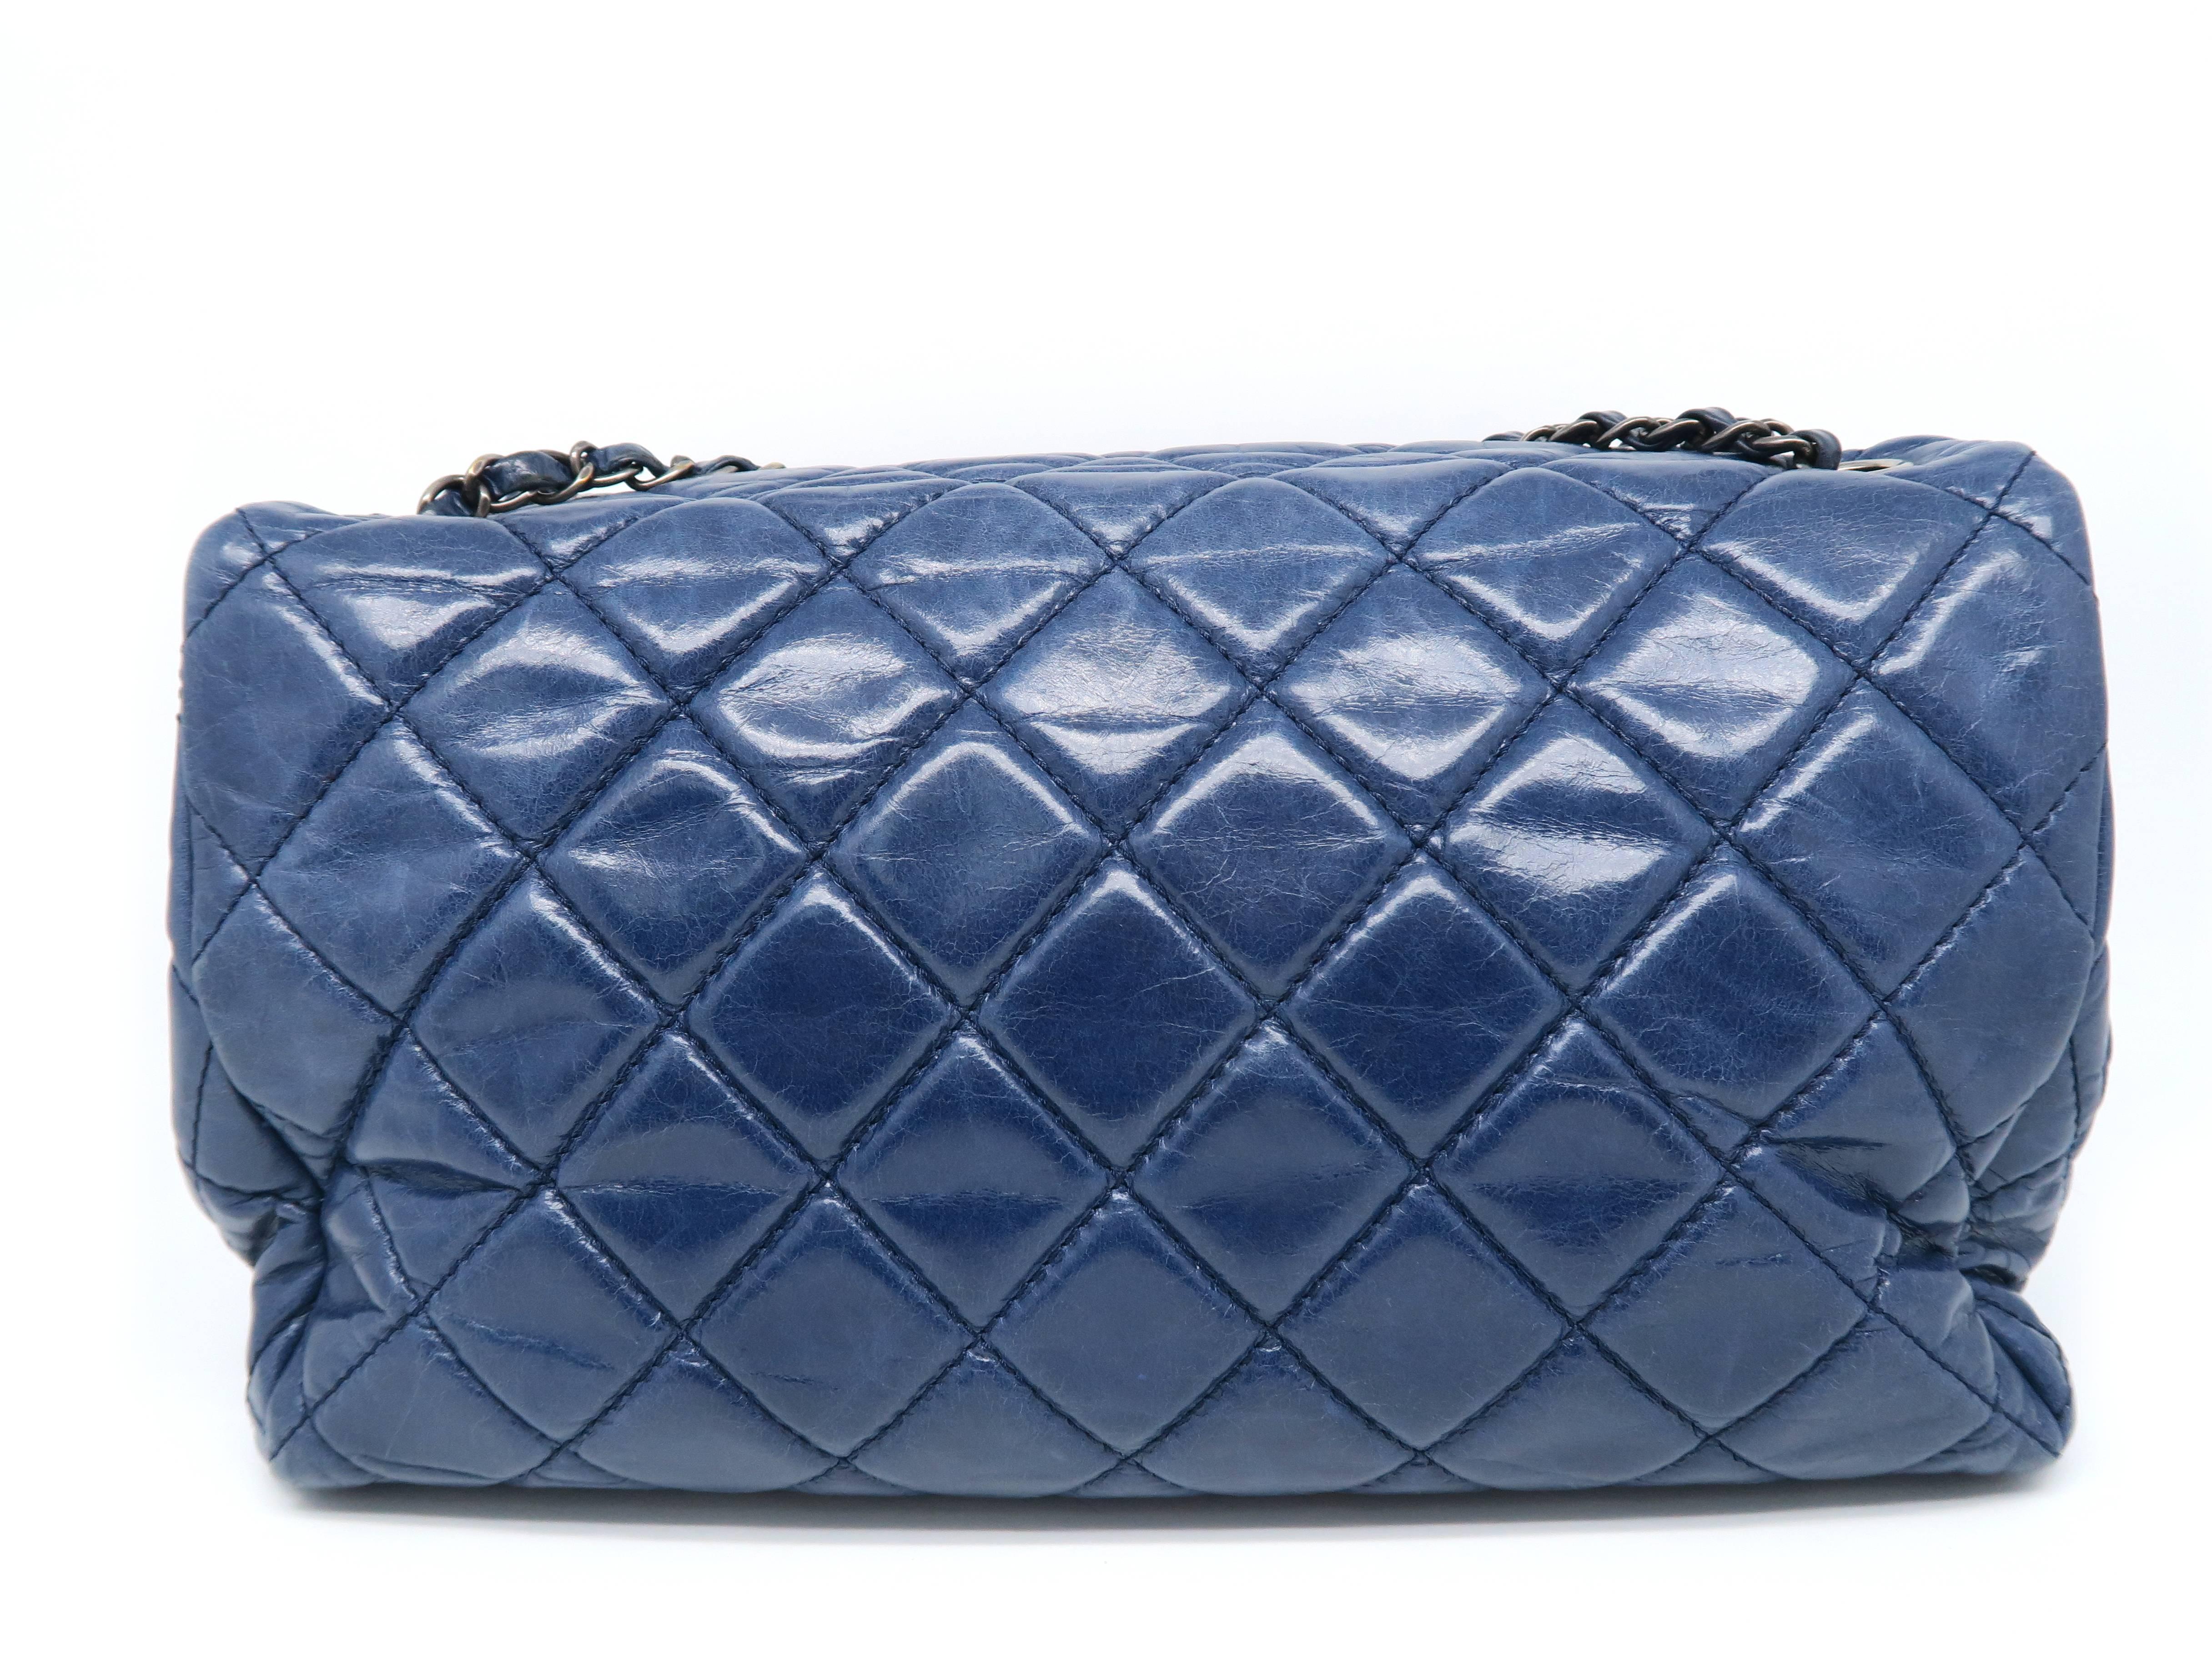 Chanel Blue Quilting Calfskin Leather Silver Metal Chain Shoulder Bag In Excellent Condition For Sale In Kowloon, HK